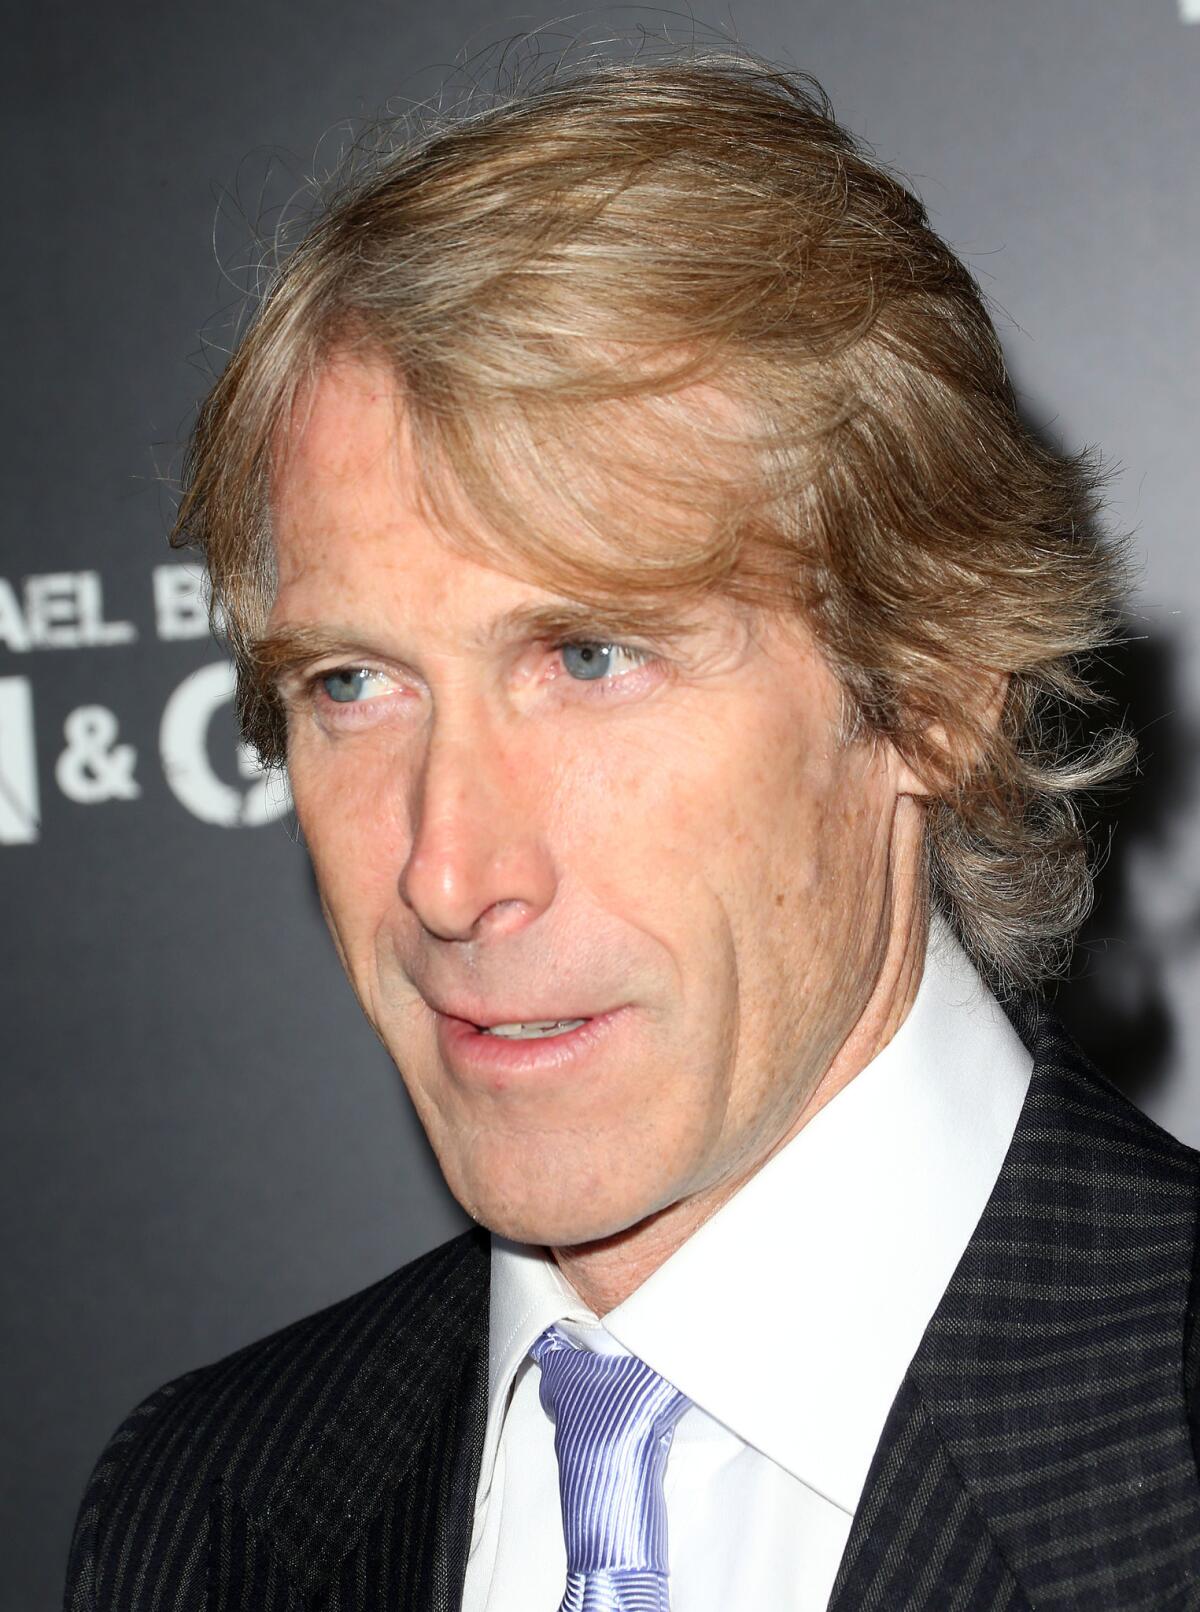 Director/producer Michael Bay at the premiere of Paramount Pictures' "Pain & Gain" at the TCL Chinese Theatre on in Hollywood.